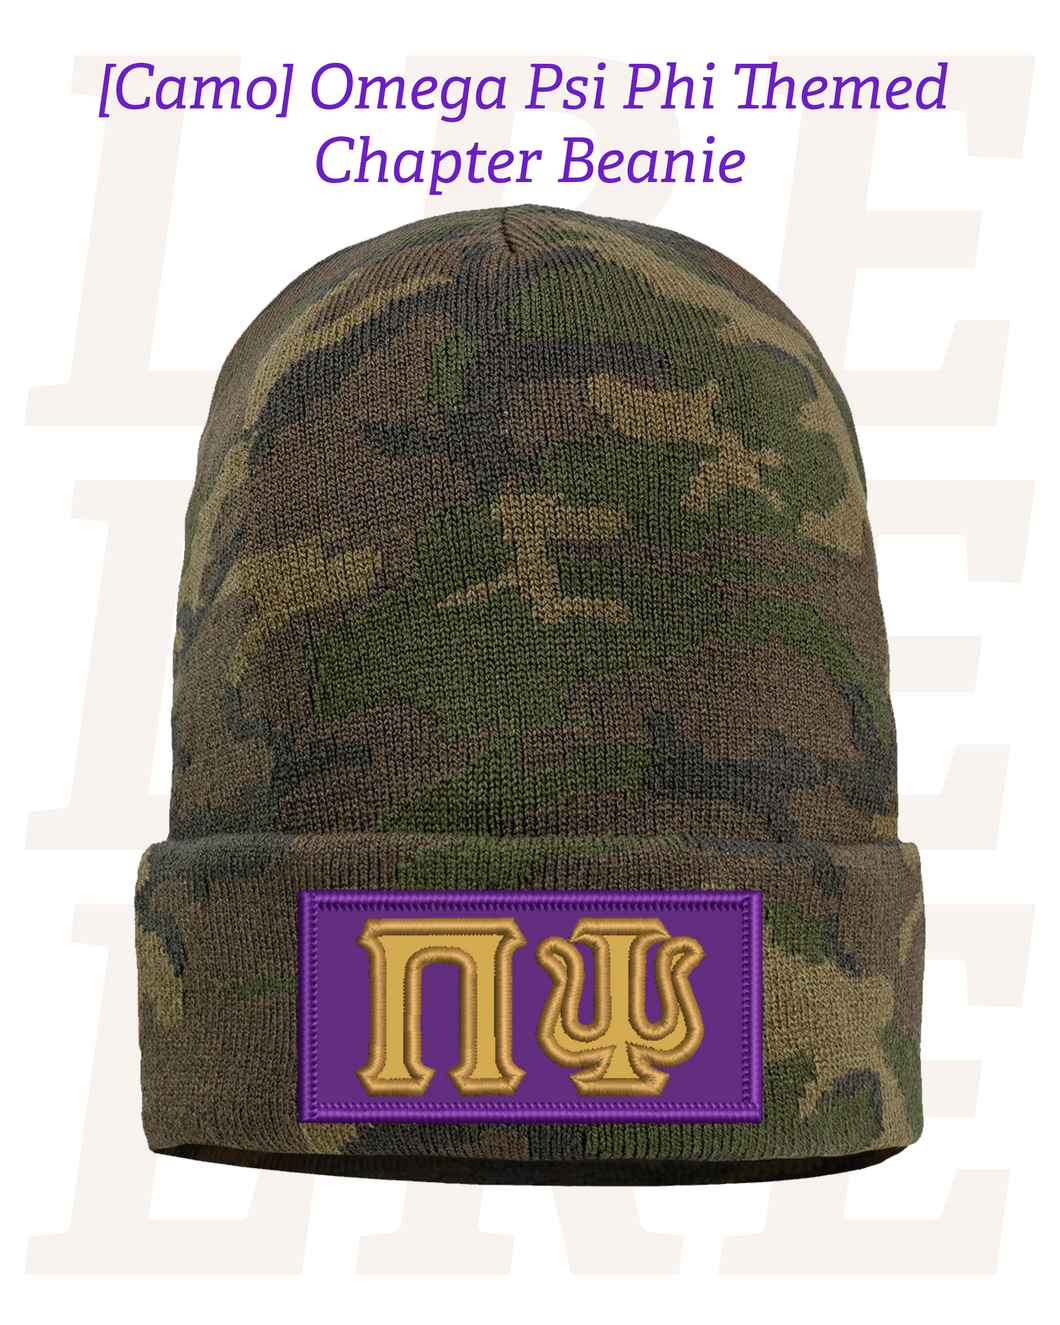 [Camo] Embroidered Omega Psi Phi Themed Chapter Beanie